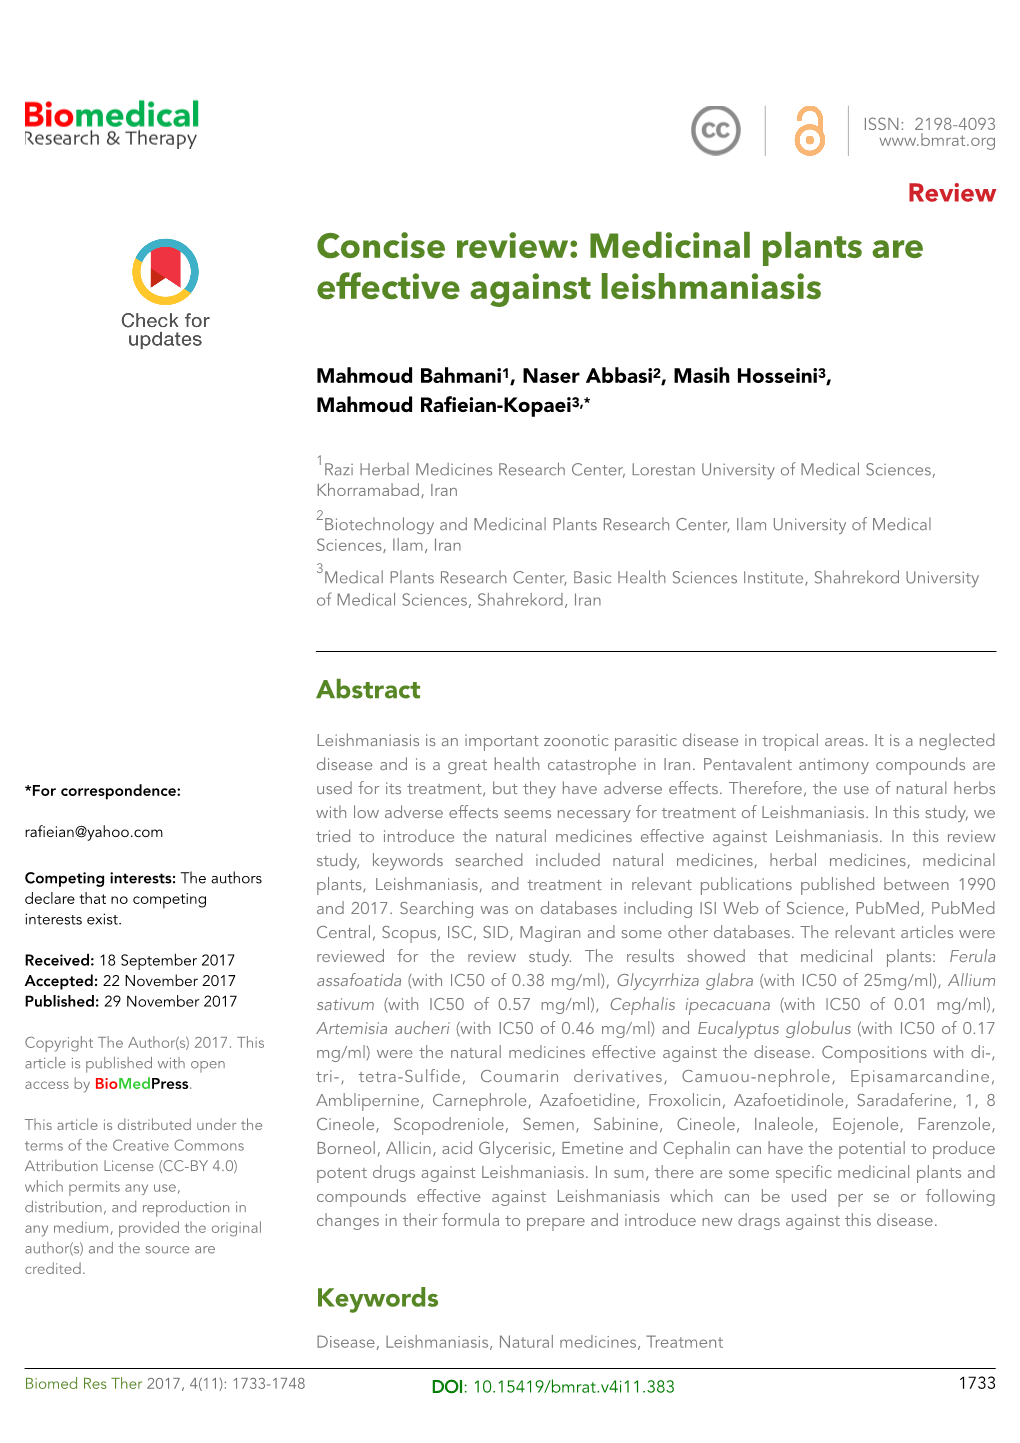 Concise Review: Medicinal Plants Are Effective Against Leishmaniasis